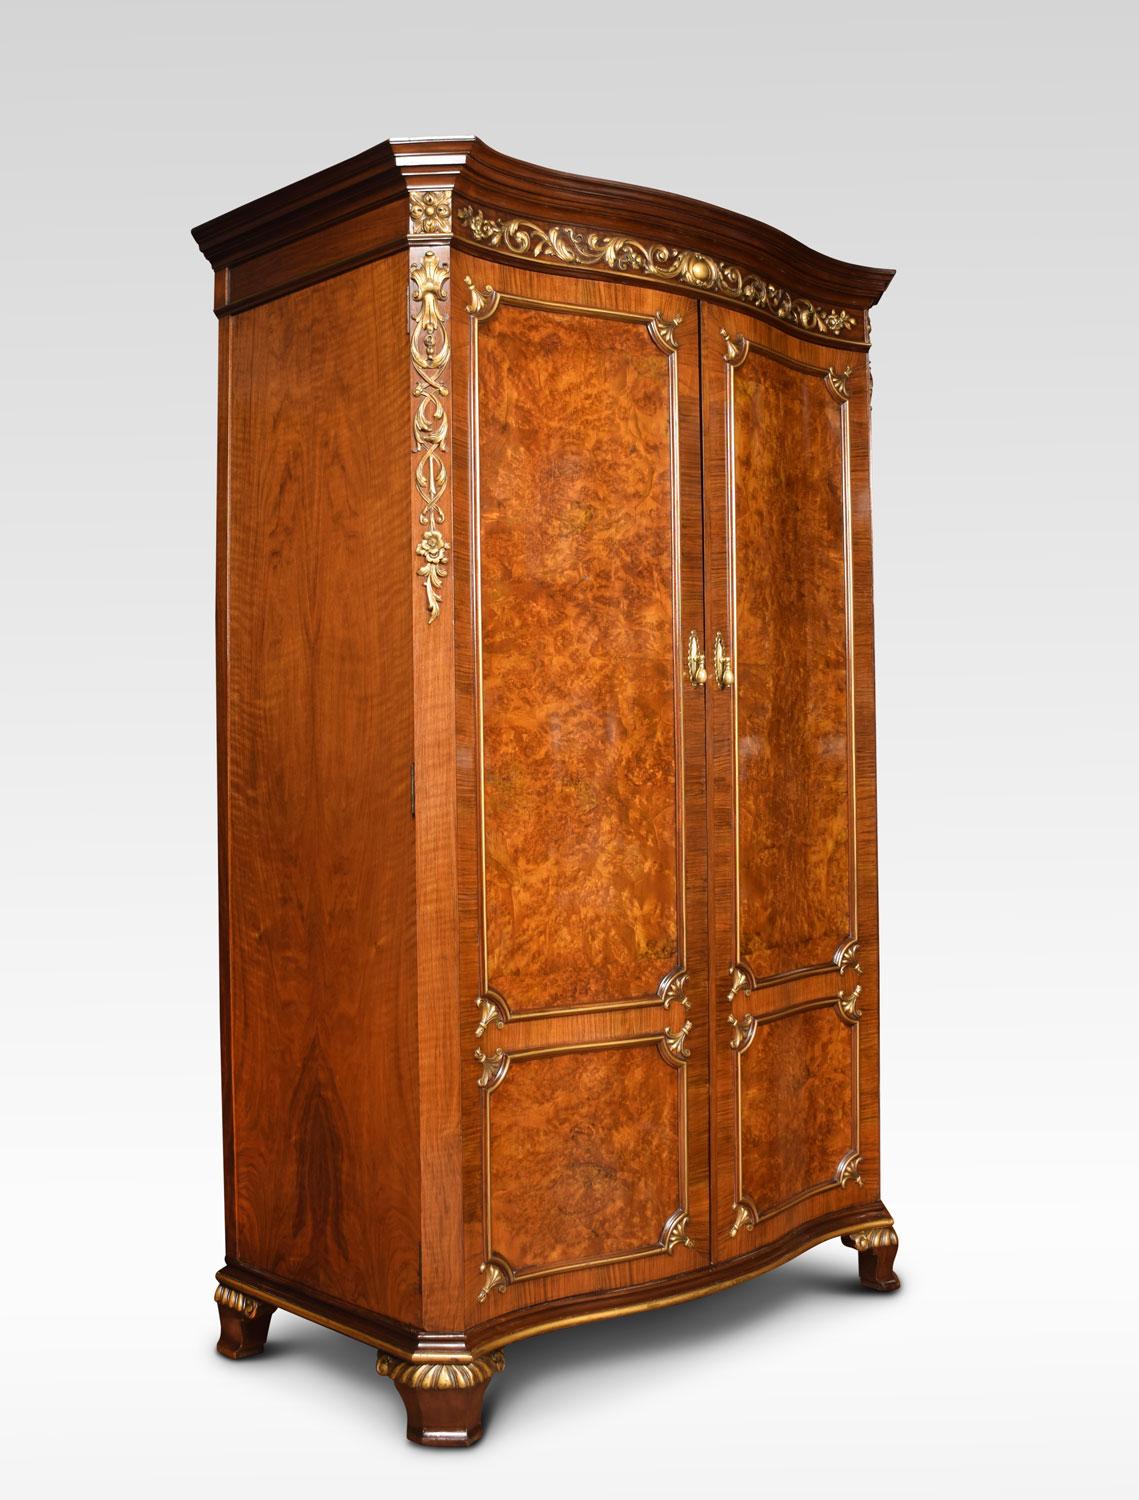 19th century Maple & Co. wardrobe. The flared cornice having giltwood floral scrolling carving above a pair of large serpentine panelled doors opening to reveal cedar wood interior and large hanging area. All raised up on bold bracket